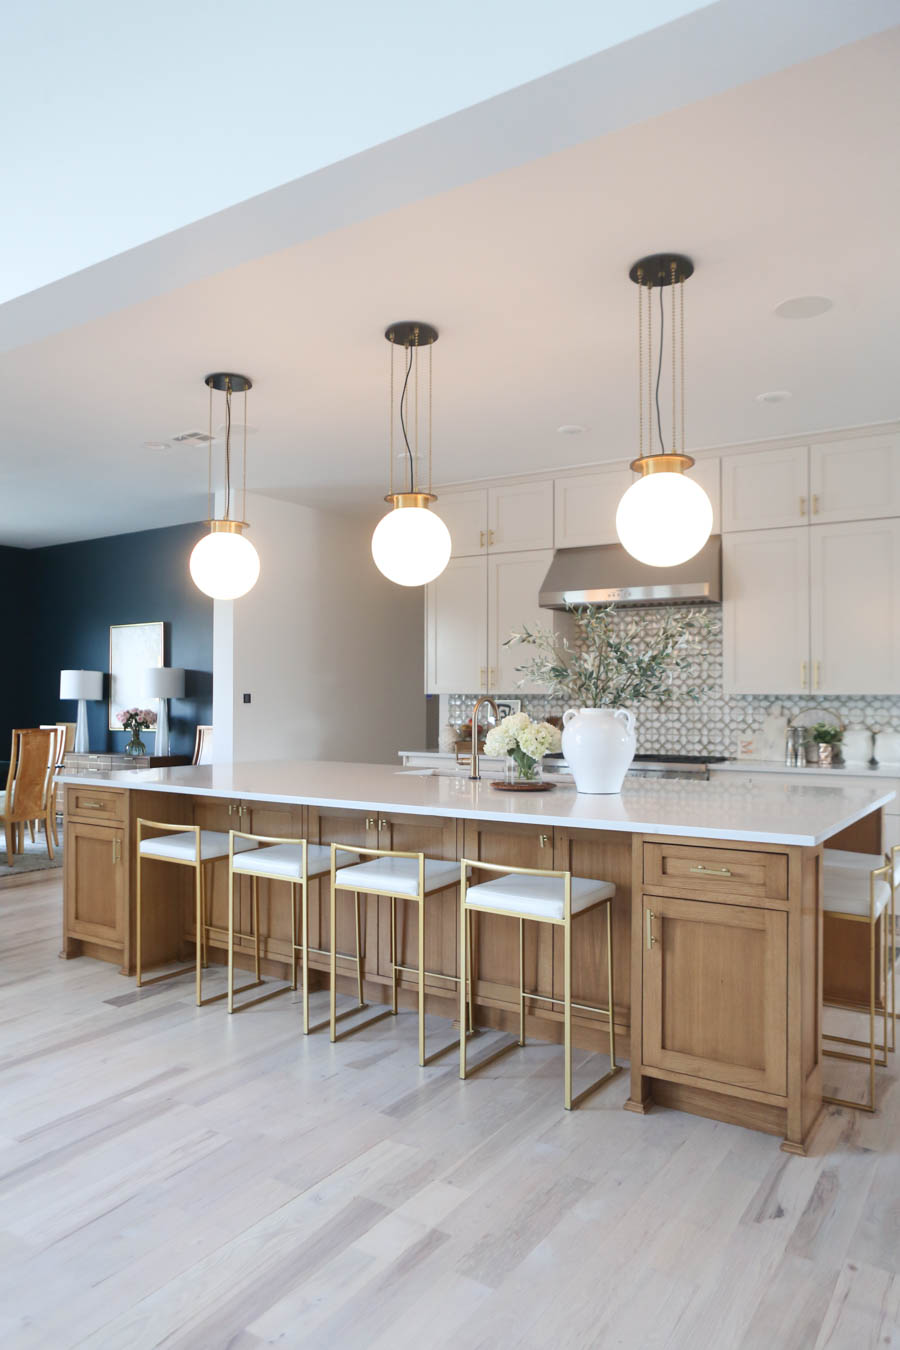 CC and MIke Kitchen Remodel Reveal large natural wood island with quartz countertops and gold bar stools black and gold pendants Ann sacks patterned backsplash gold Brizo faucet large Kallista stainless steel sink open floorpan